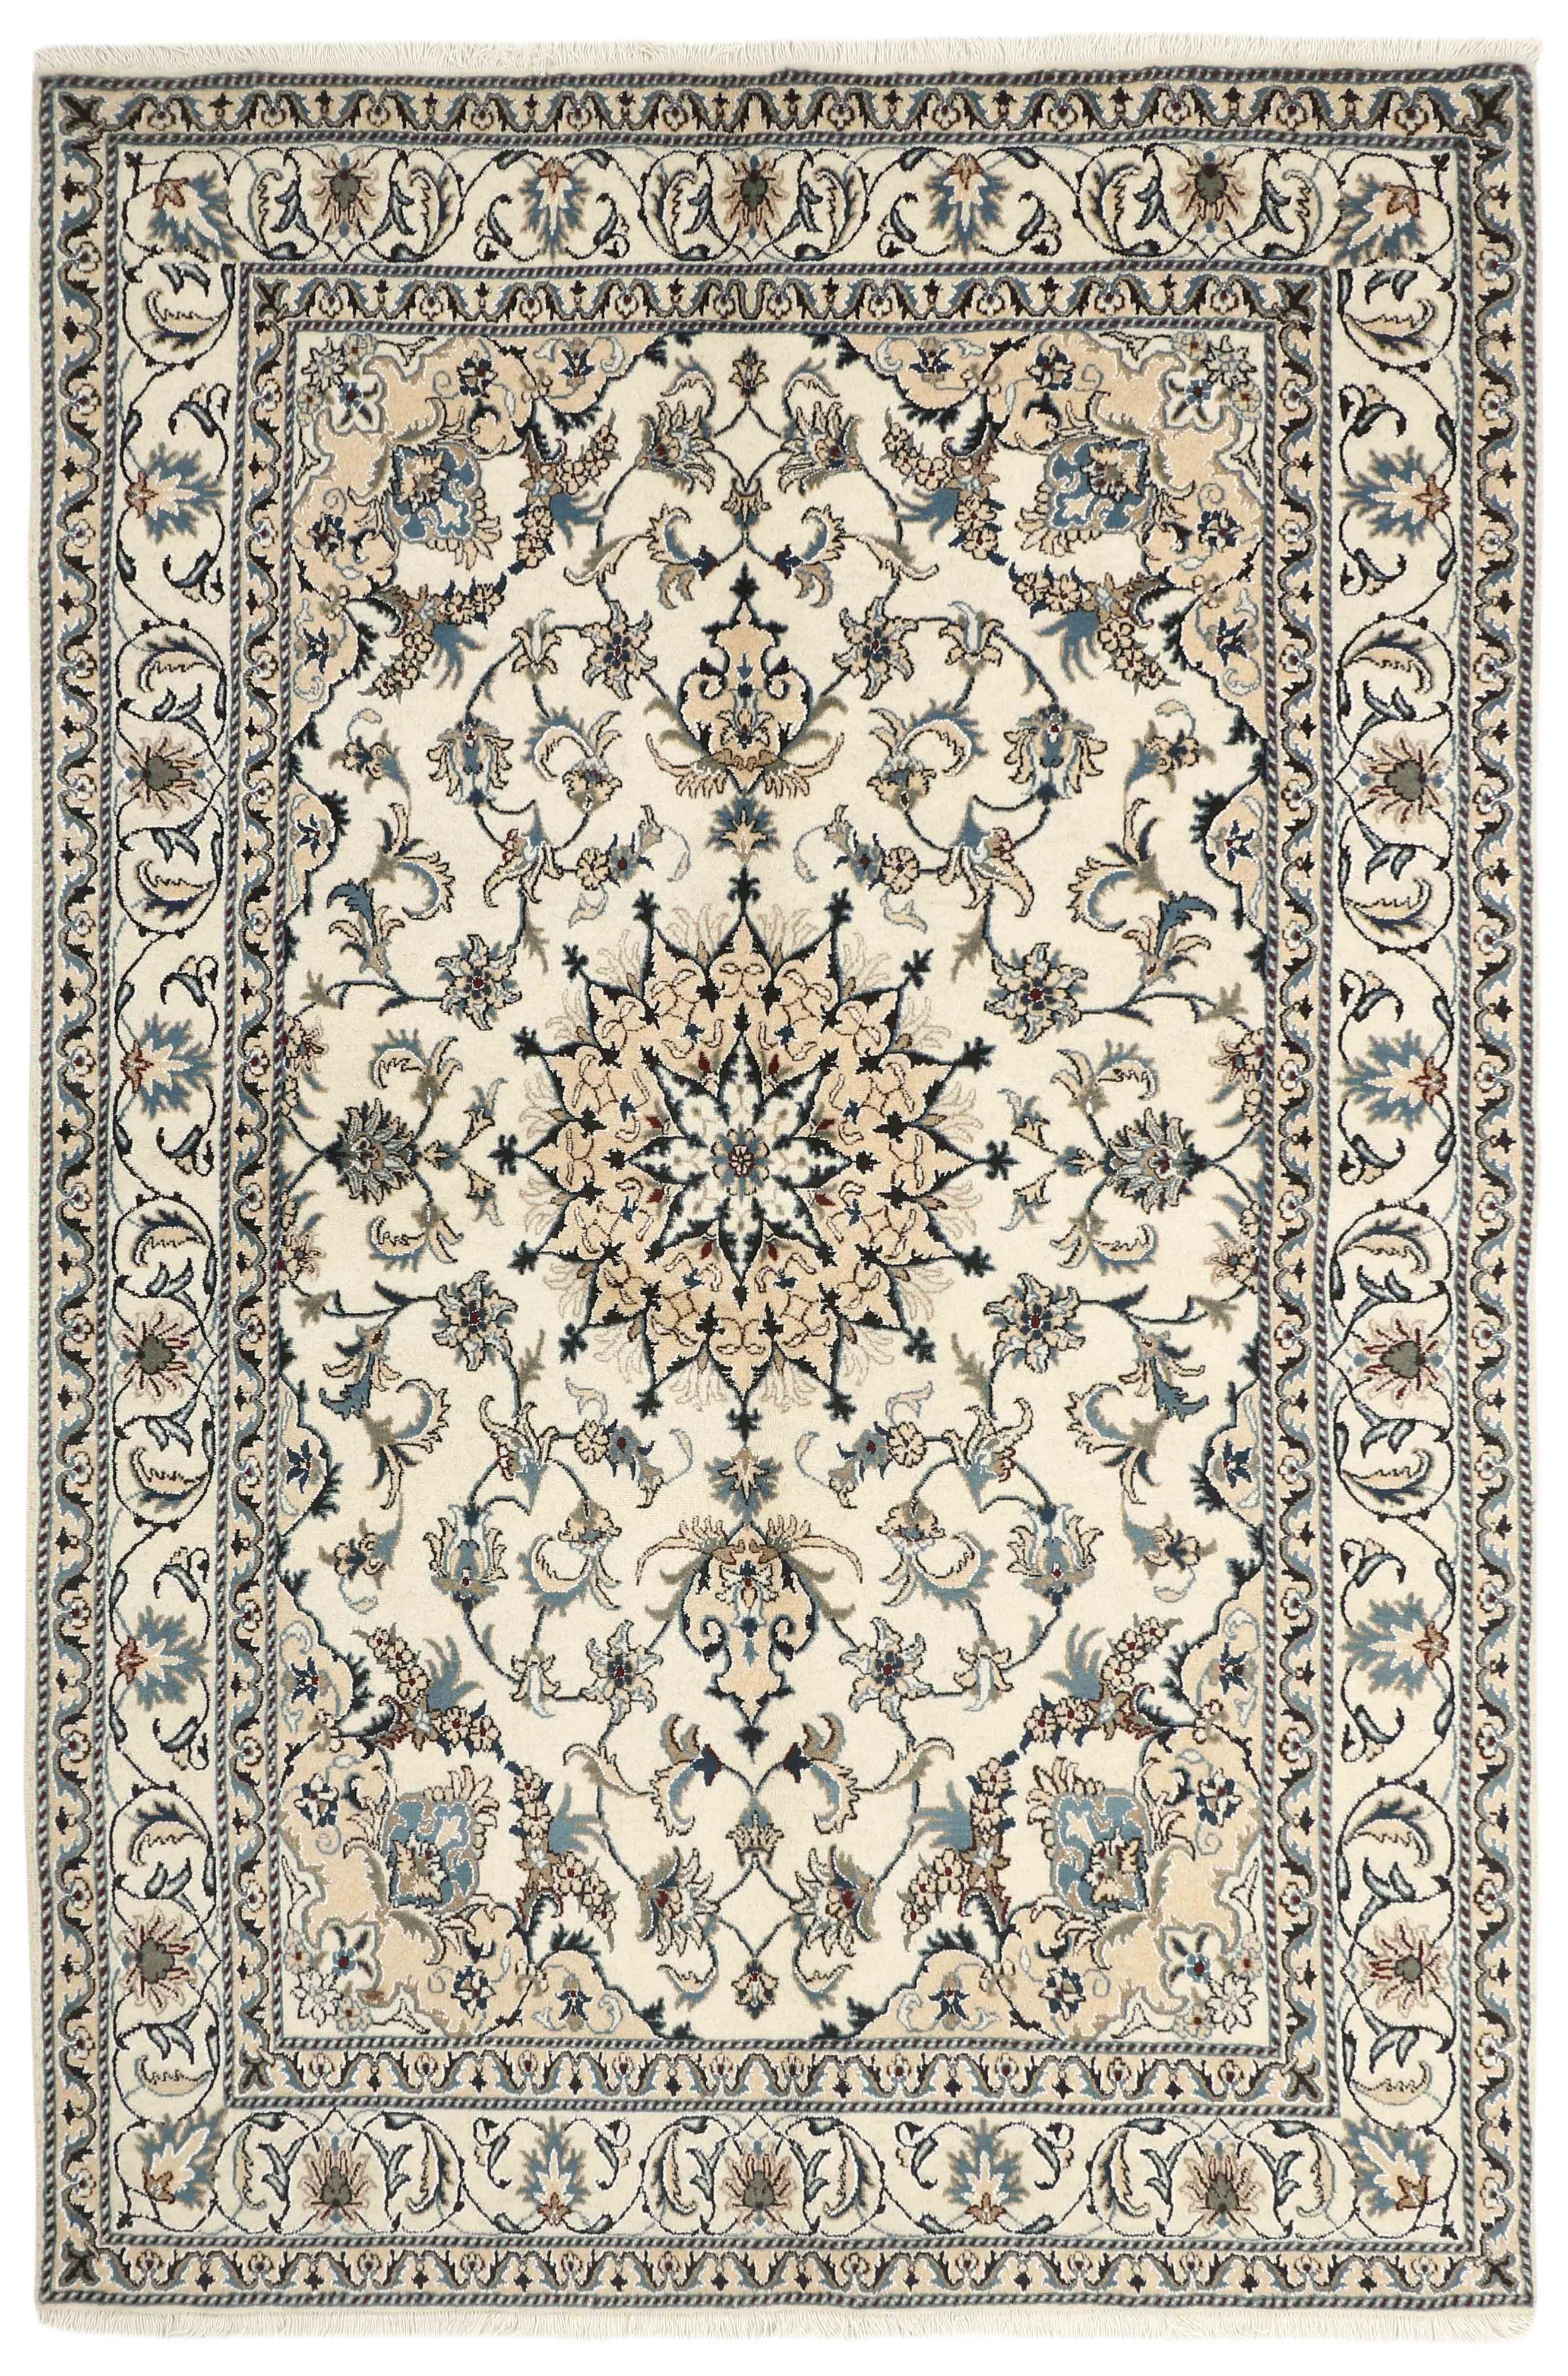 Authentic persian rug with a traditional floral design in cream, beige and blue